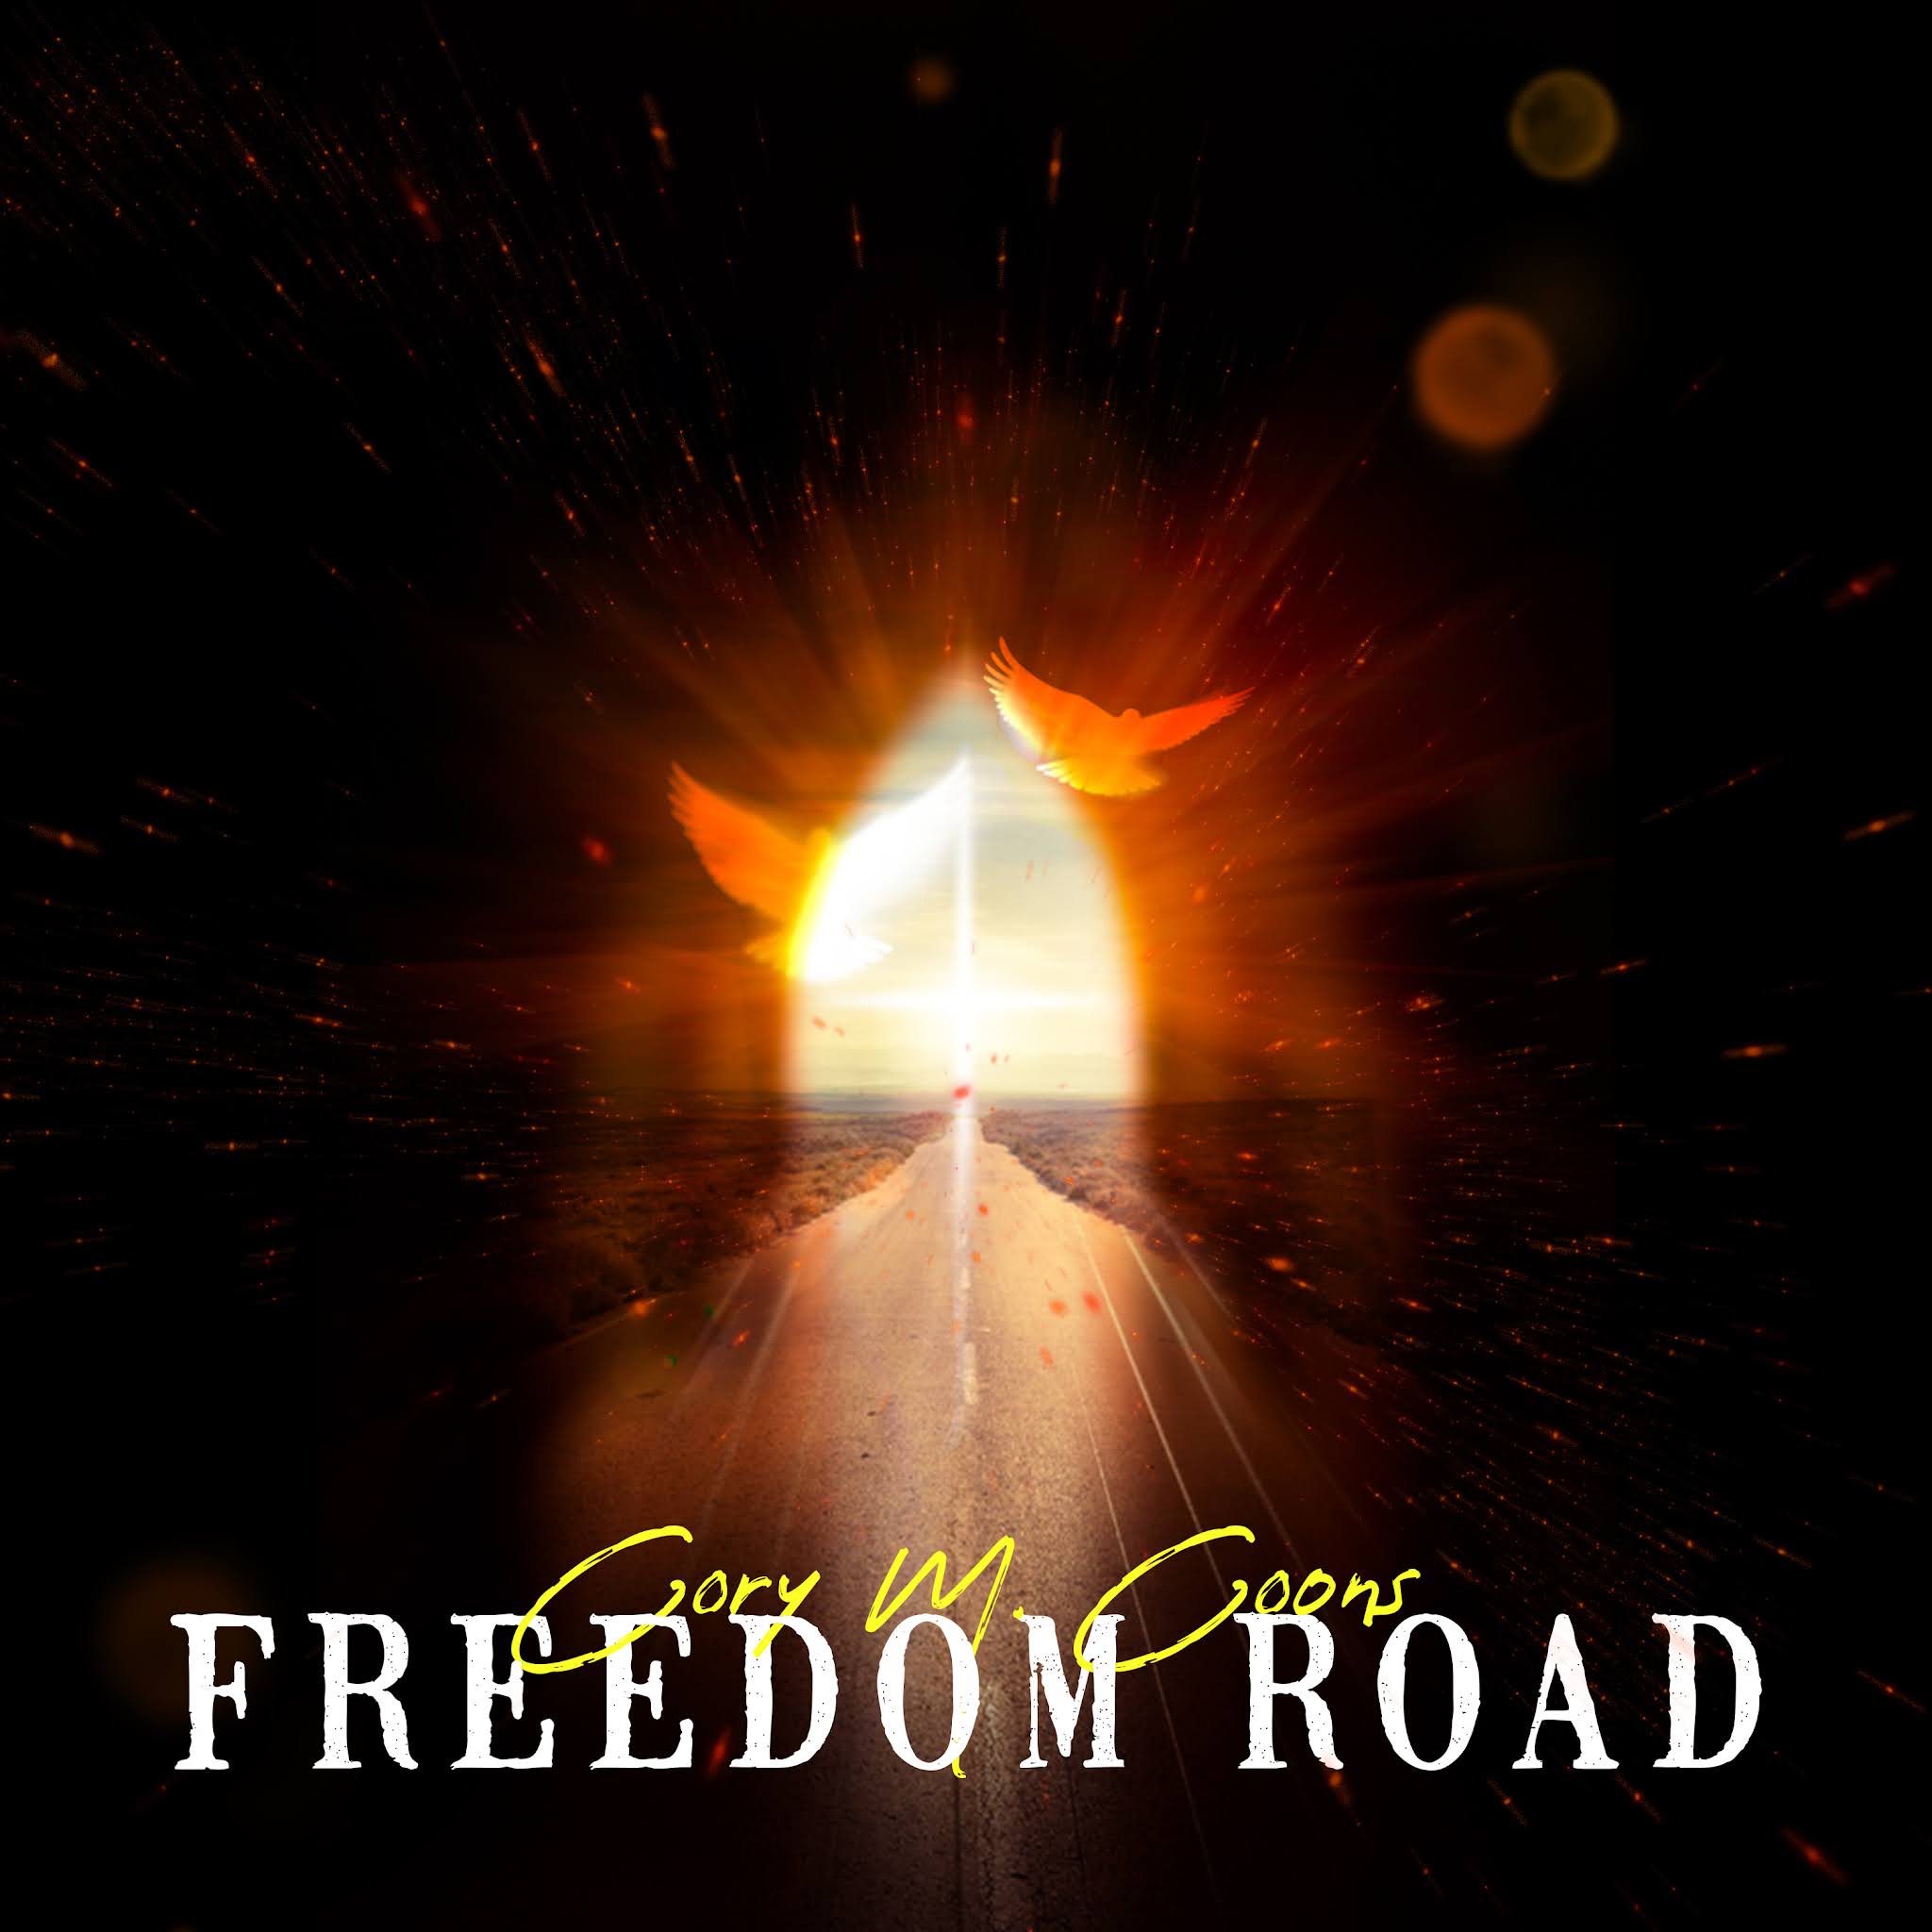 'Freedom Road' by Cory M. Coons